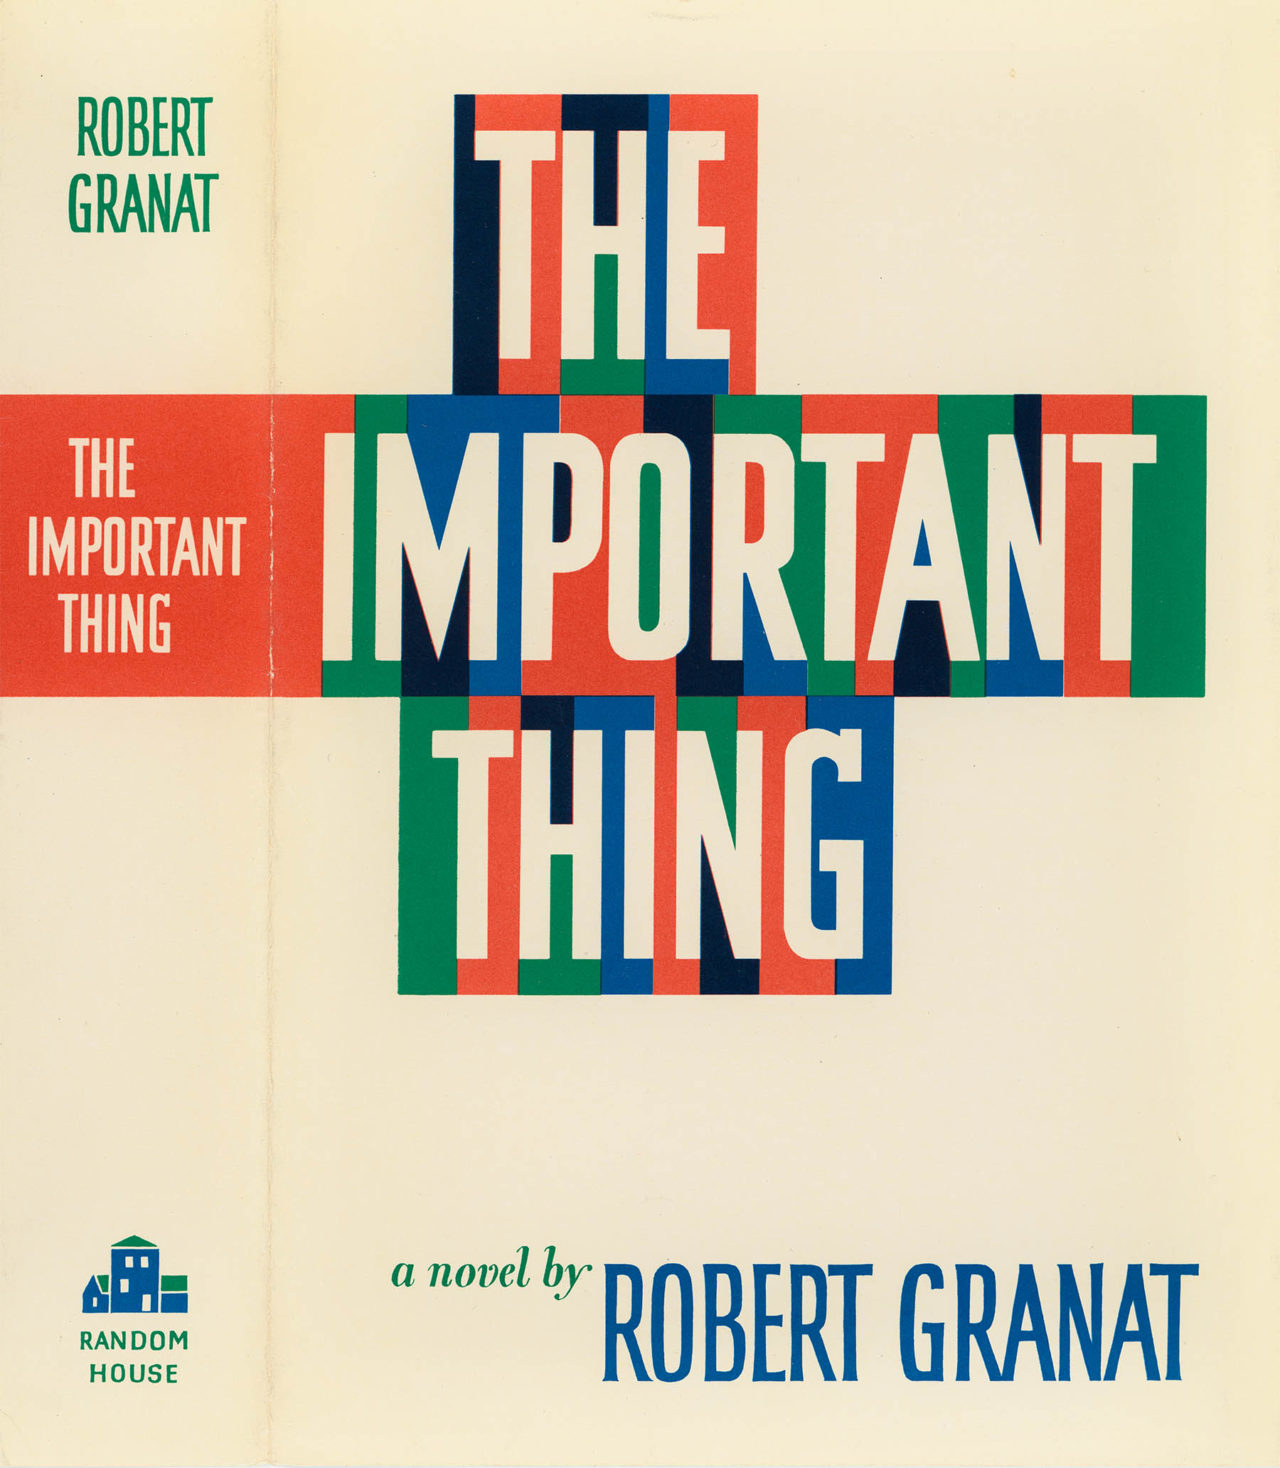 Book jacket of The Important Thing